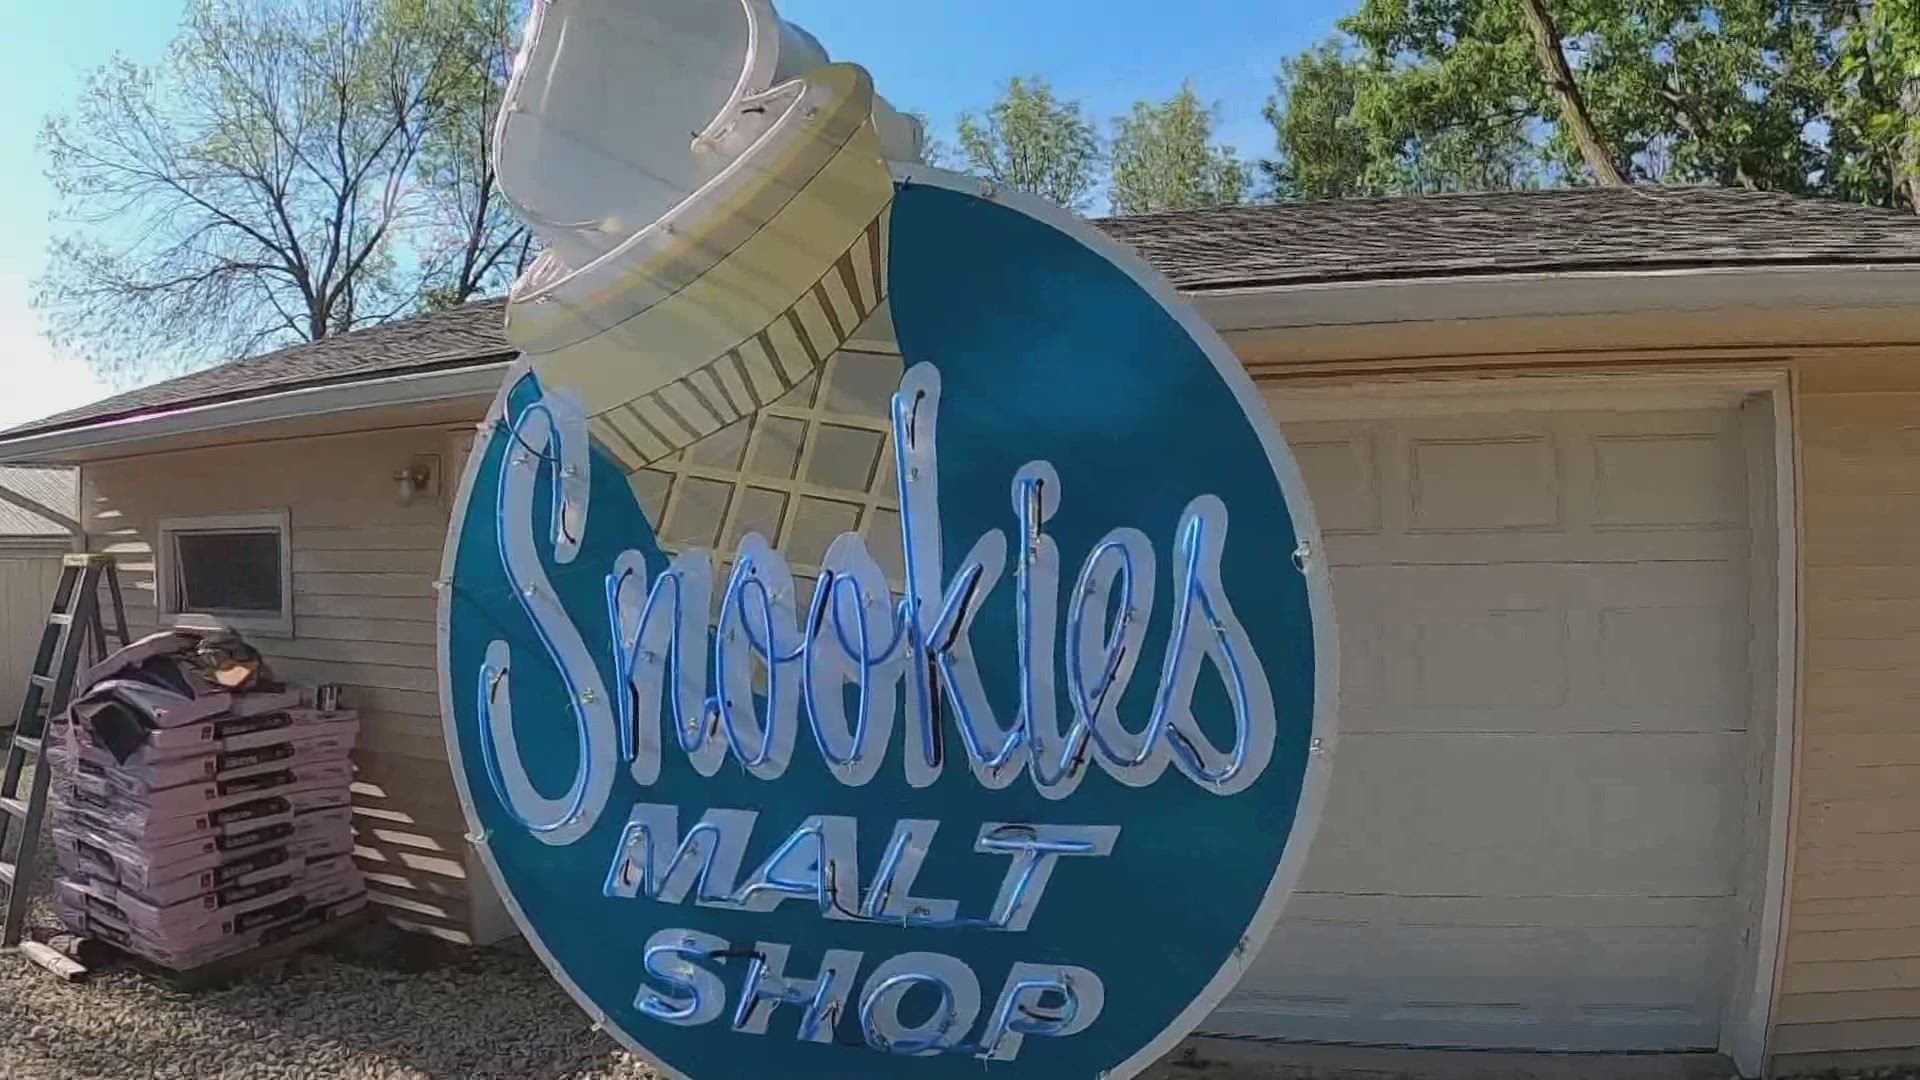 The Snookies sign will be installed Friday at 5 p.m.